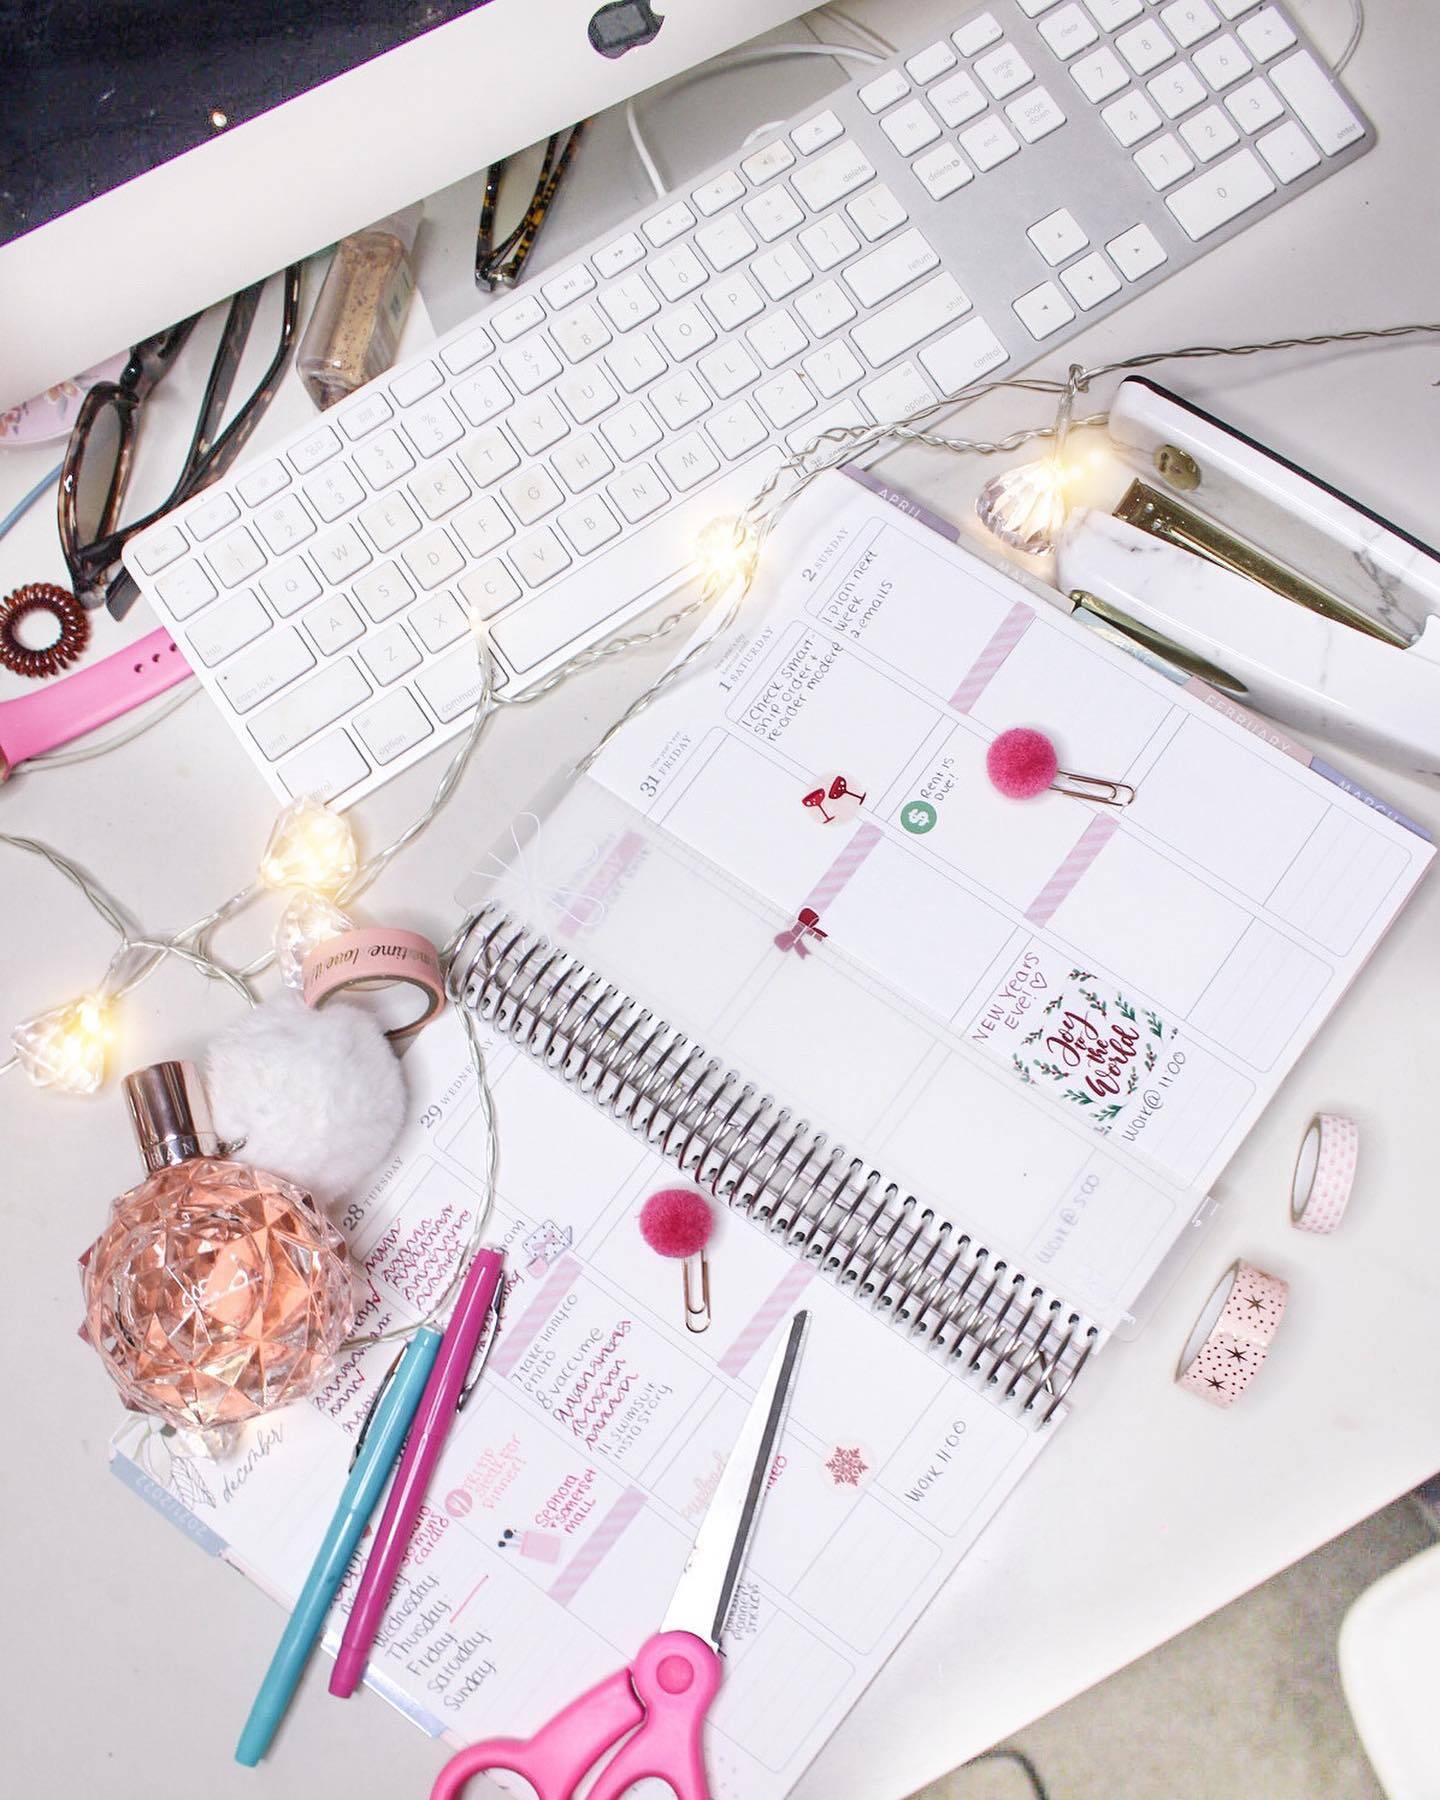 Happy Monday everyone ! Time to get back on the grind starting off with planning my week. Let’s make it a productive one!💗💗🖊🎀
.
.
#planner #planneraddict #plannercommunity #erincondren #michiganblogger #detroitblogger #blogger #michiganyoutuber #plannerinspiration #plannerstickers #ari #asthetic #everythingpink #erincondrenlifeplanner #erincondrenvertical #erincondrenplanner